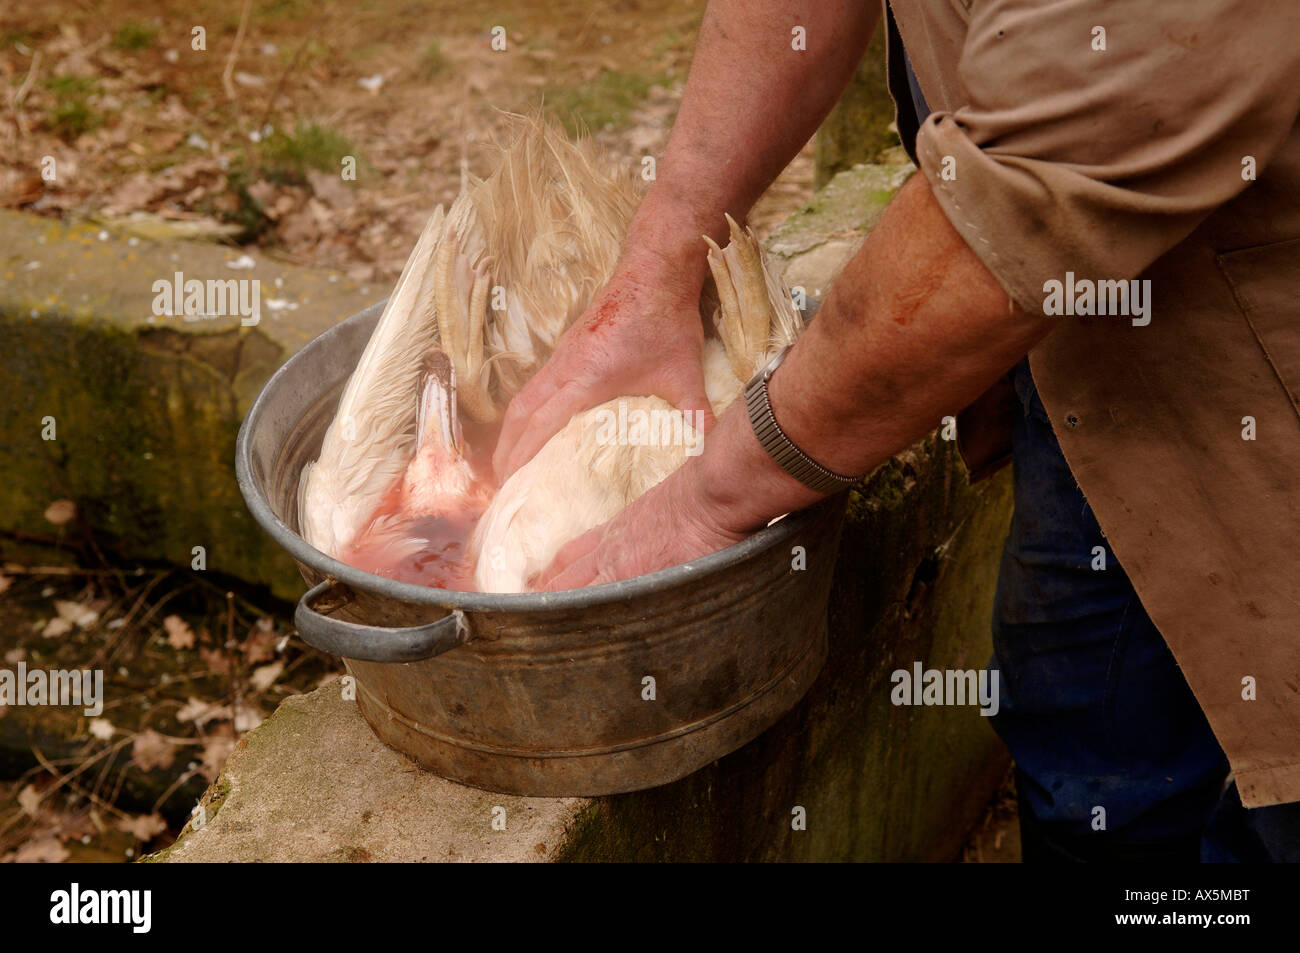 Home slaughtering (duck), farmer soaking the feathers of the duck, Eckental, Middle Franconia, Bavaria, Germany, Europe Stock Photo